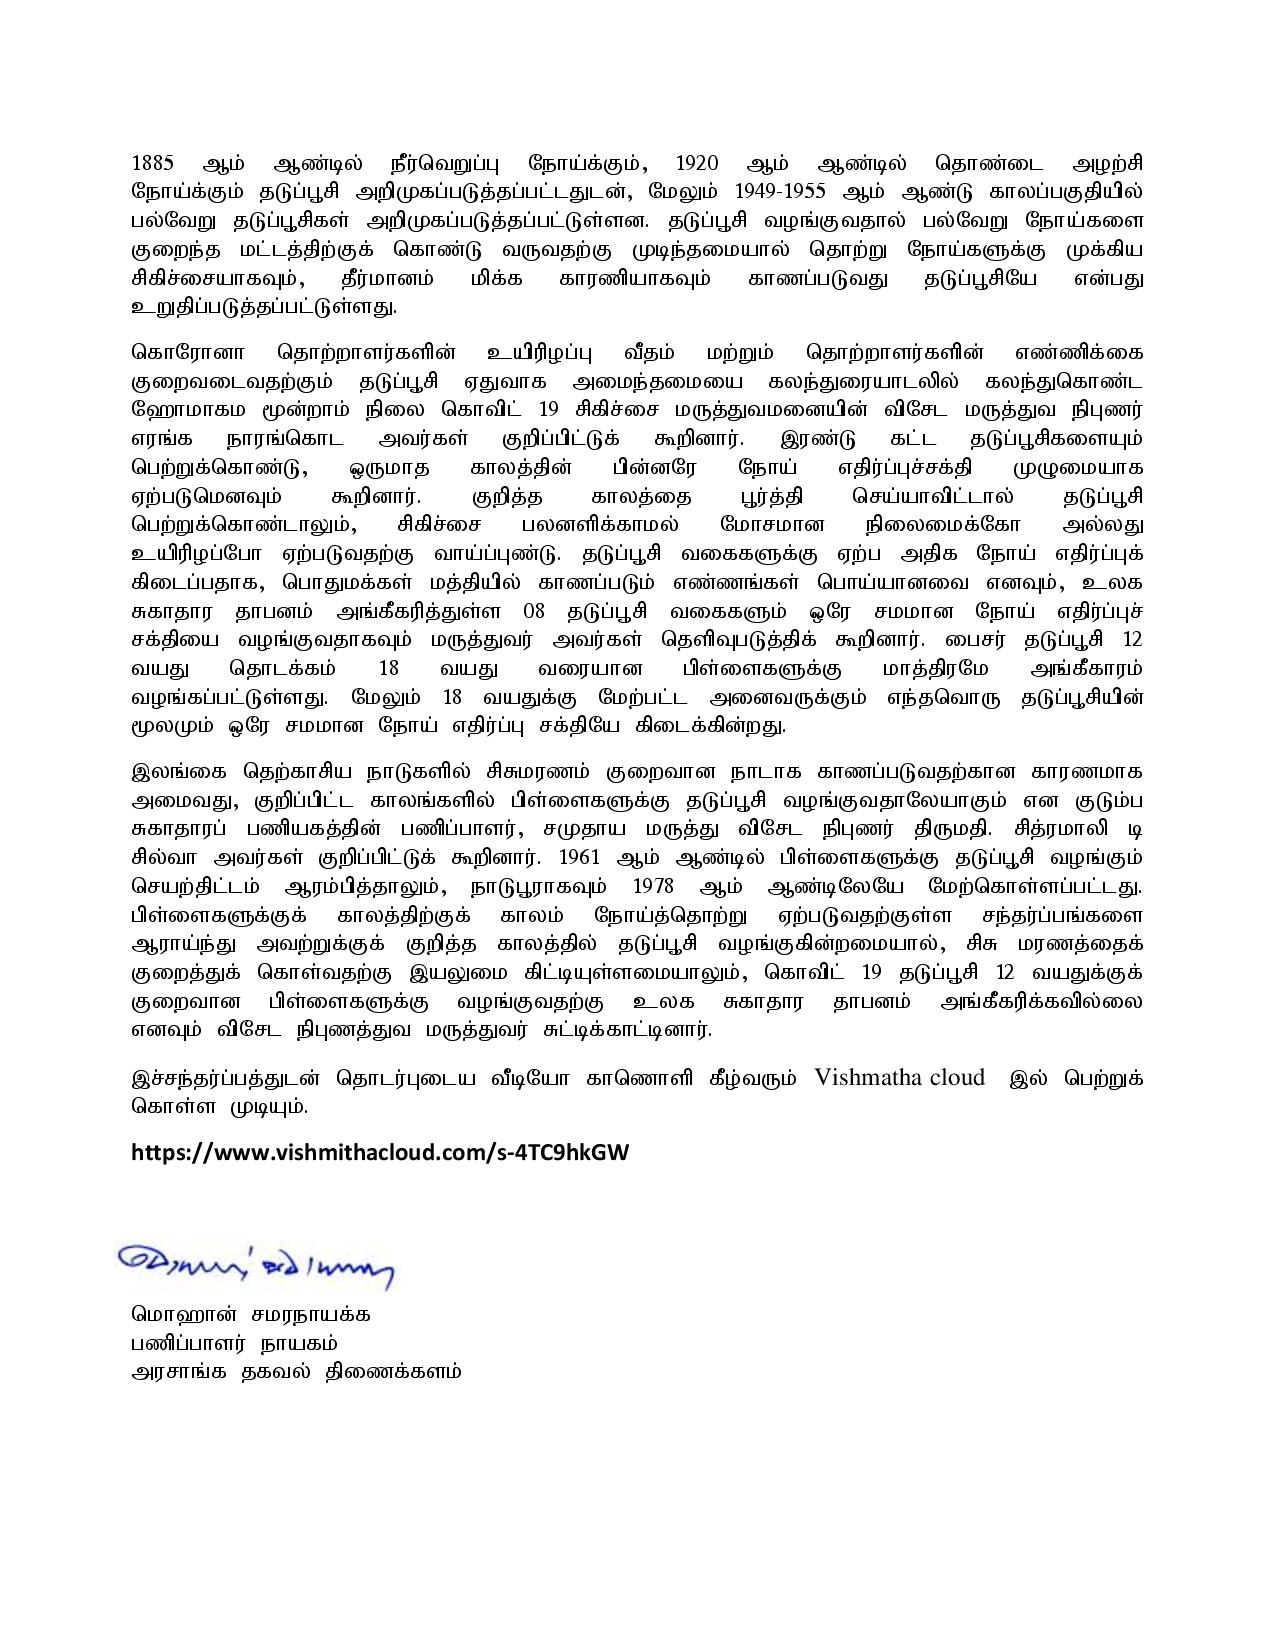 Press Release 988 Tamil. page 002